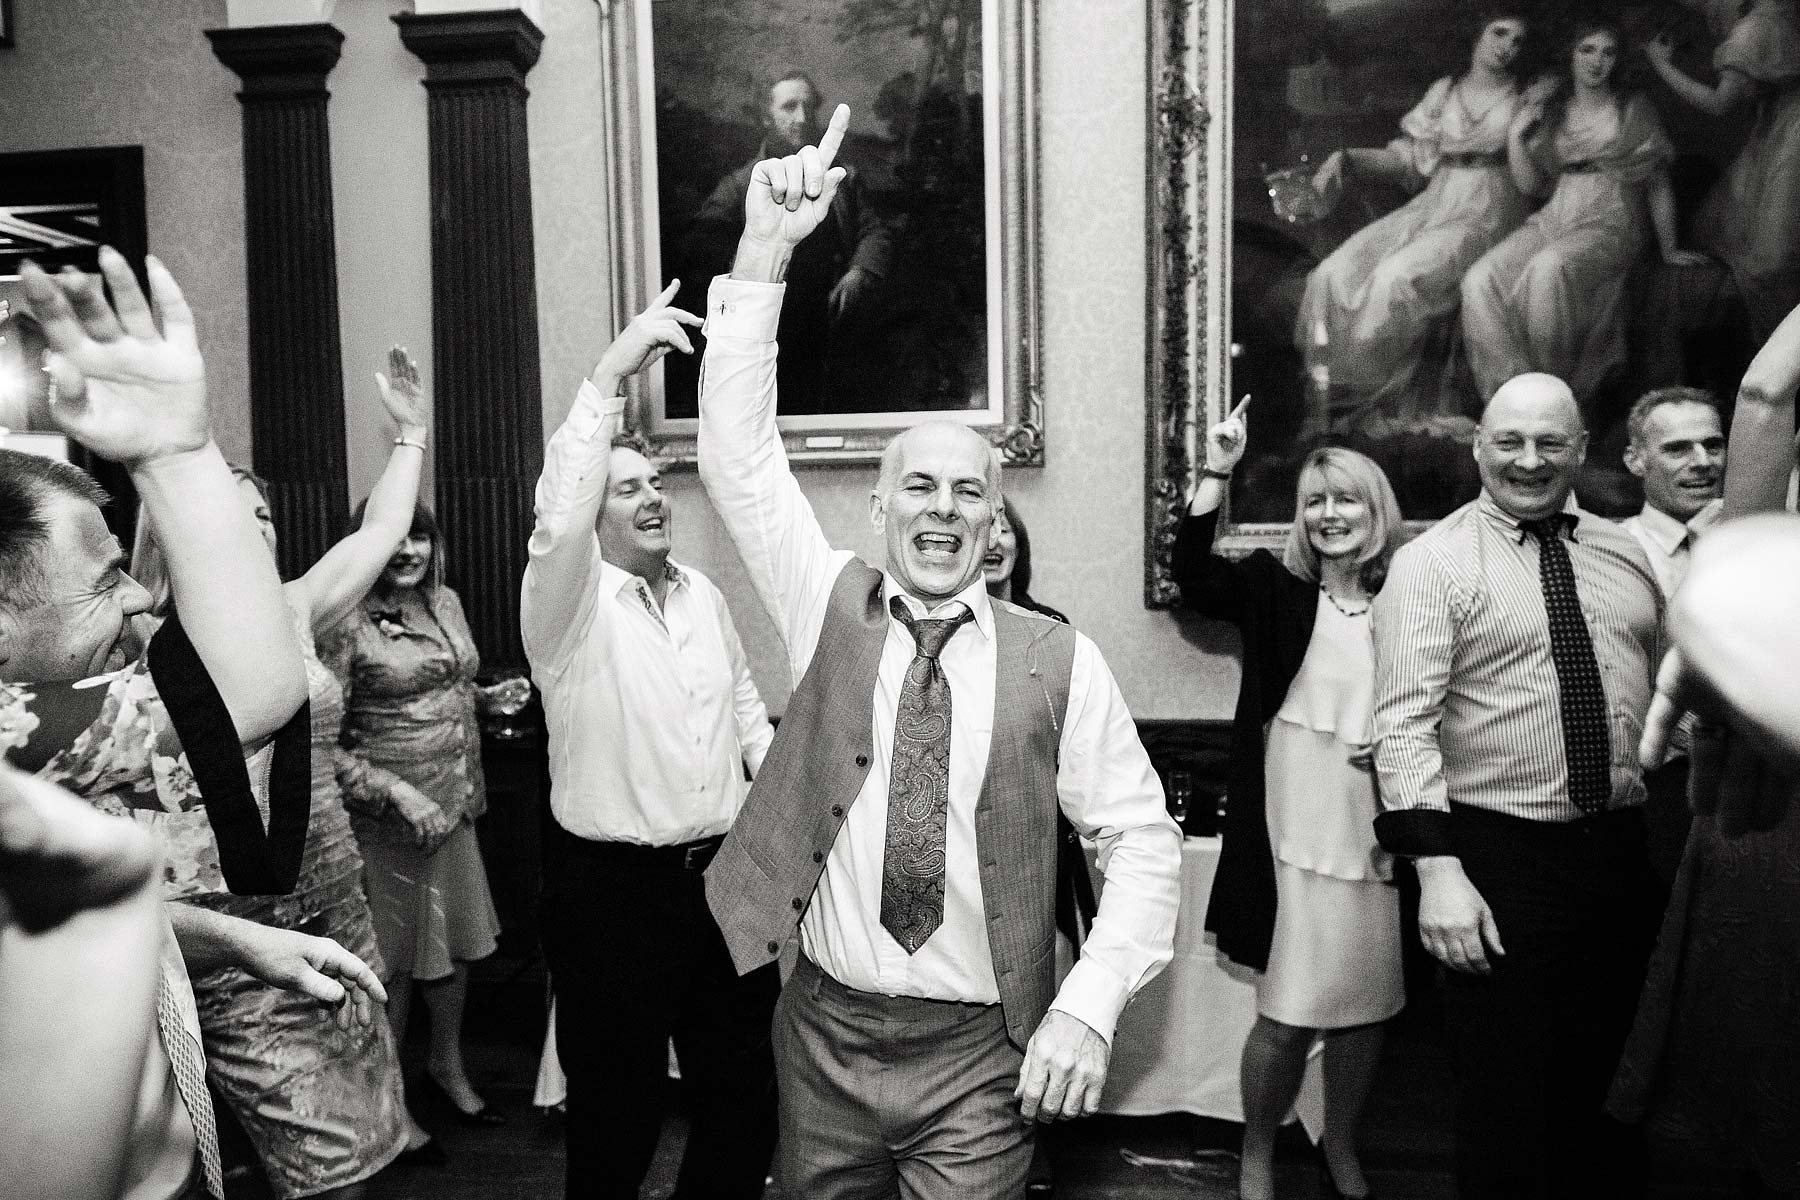 Capturing the fun and excitement of the wedding party at Sandon Hall in Stafford by Documentary Wedding Photographer Stuart James